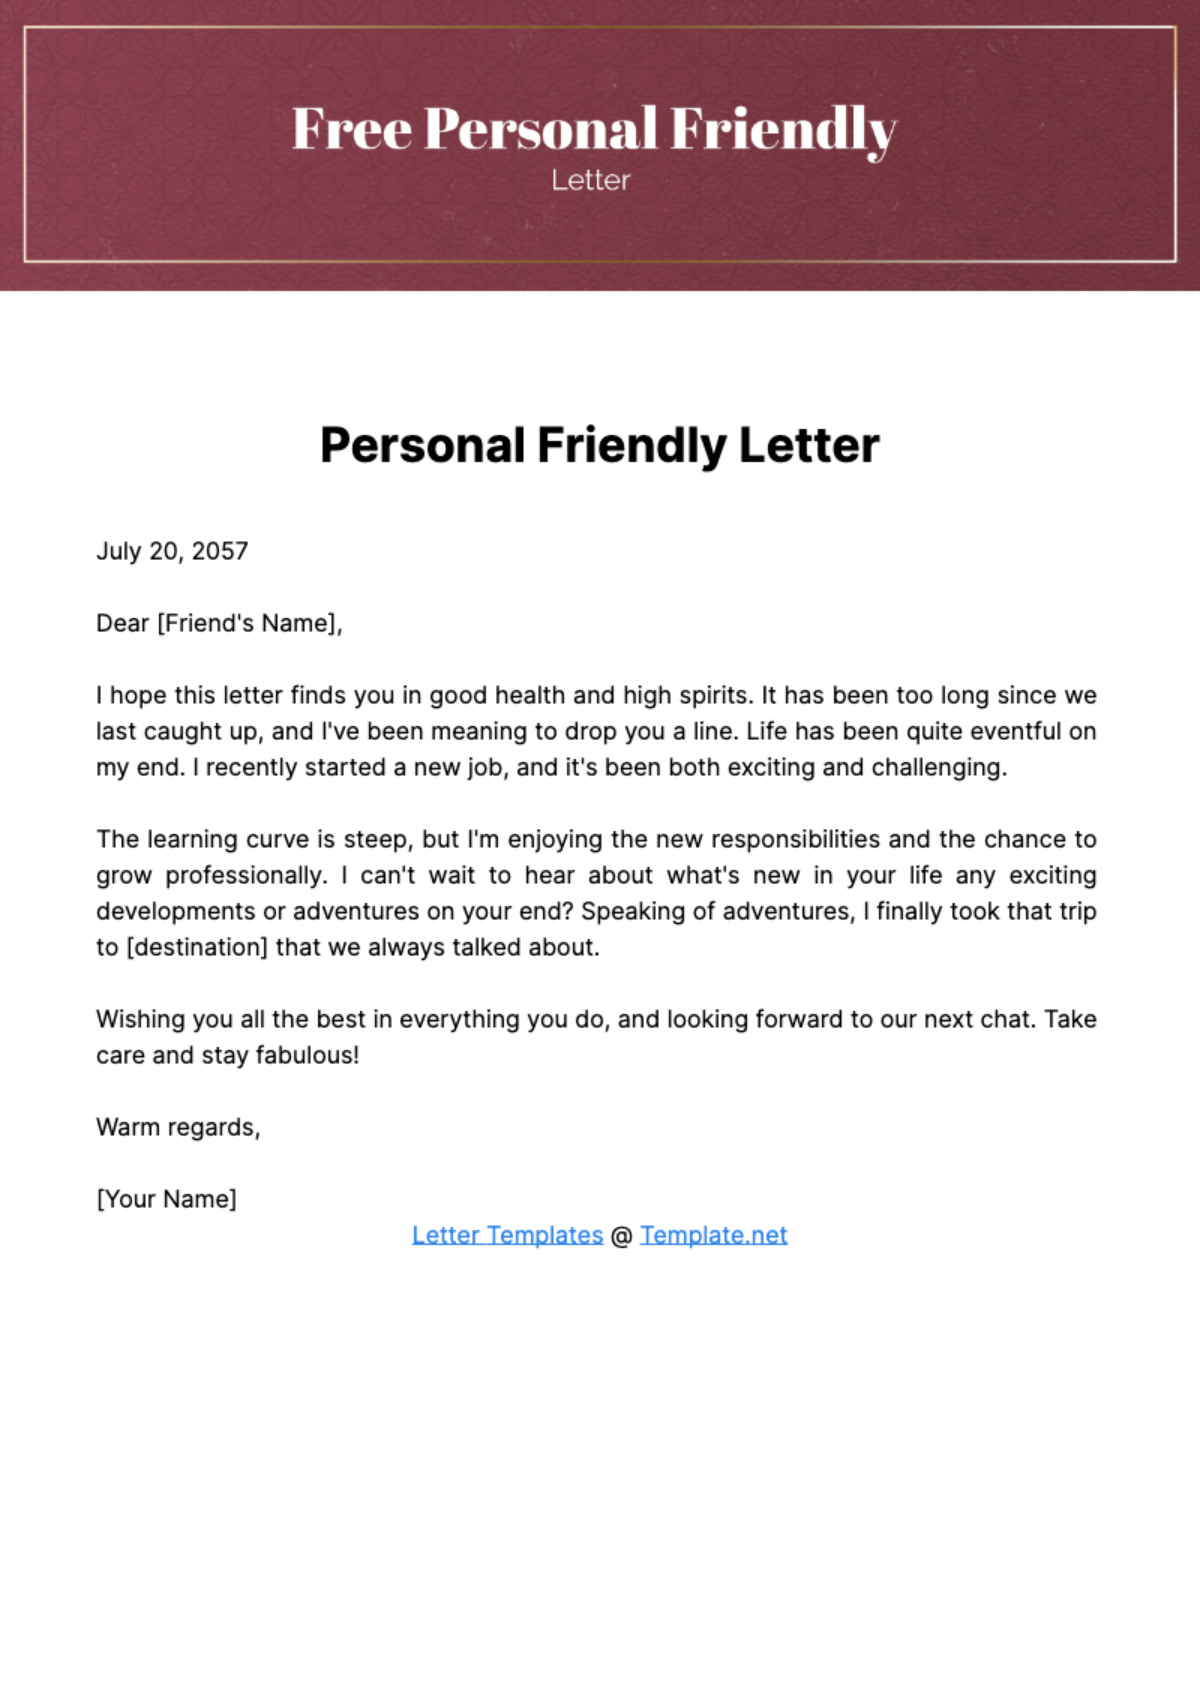 Free Personal Friendly Letter Template